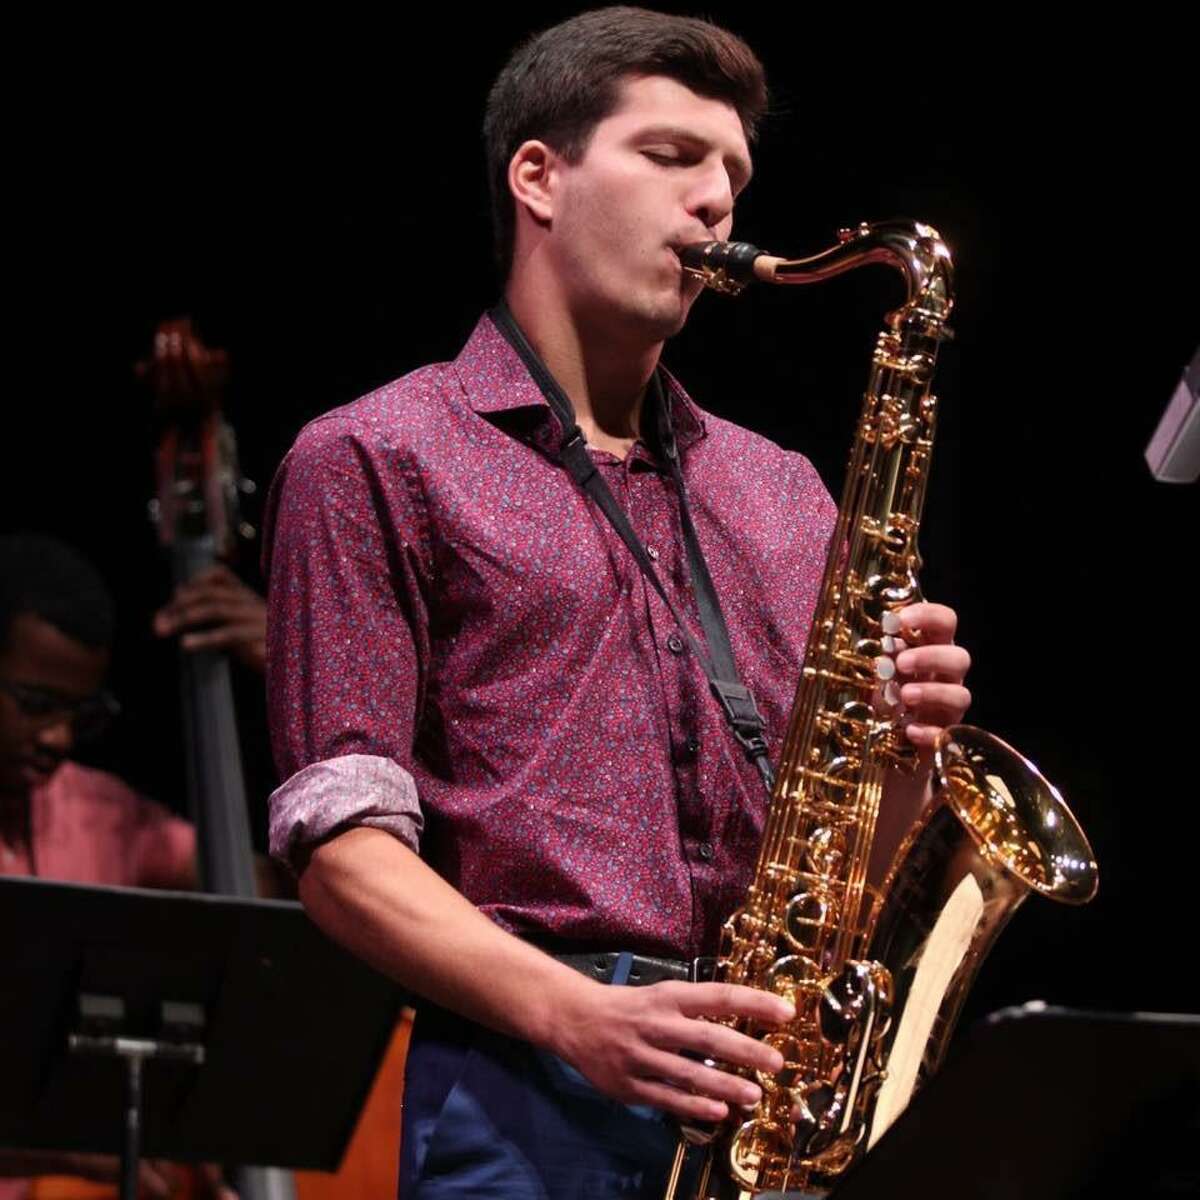 Matt Chasen and the Hartford Jazz Society and the Library Studio of Middletown will present four bands and four hours of jazz music Saturday. Shown here is musician Matt Pearl.